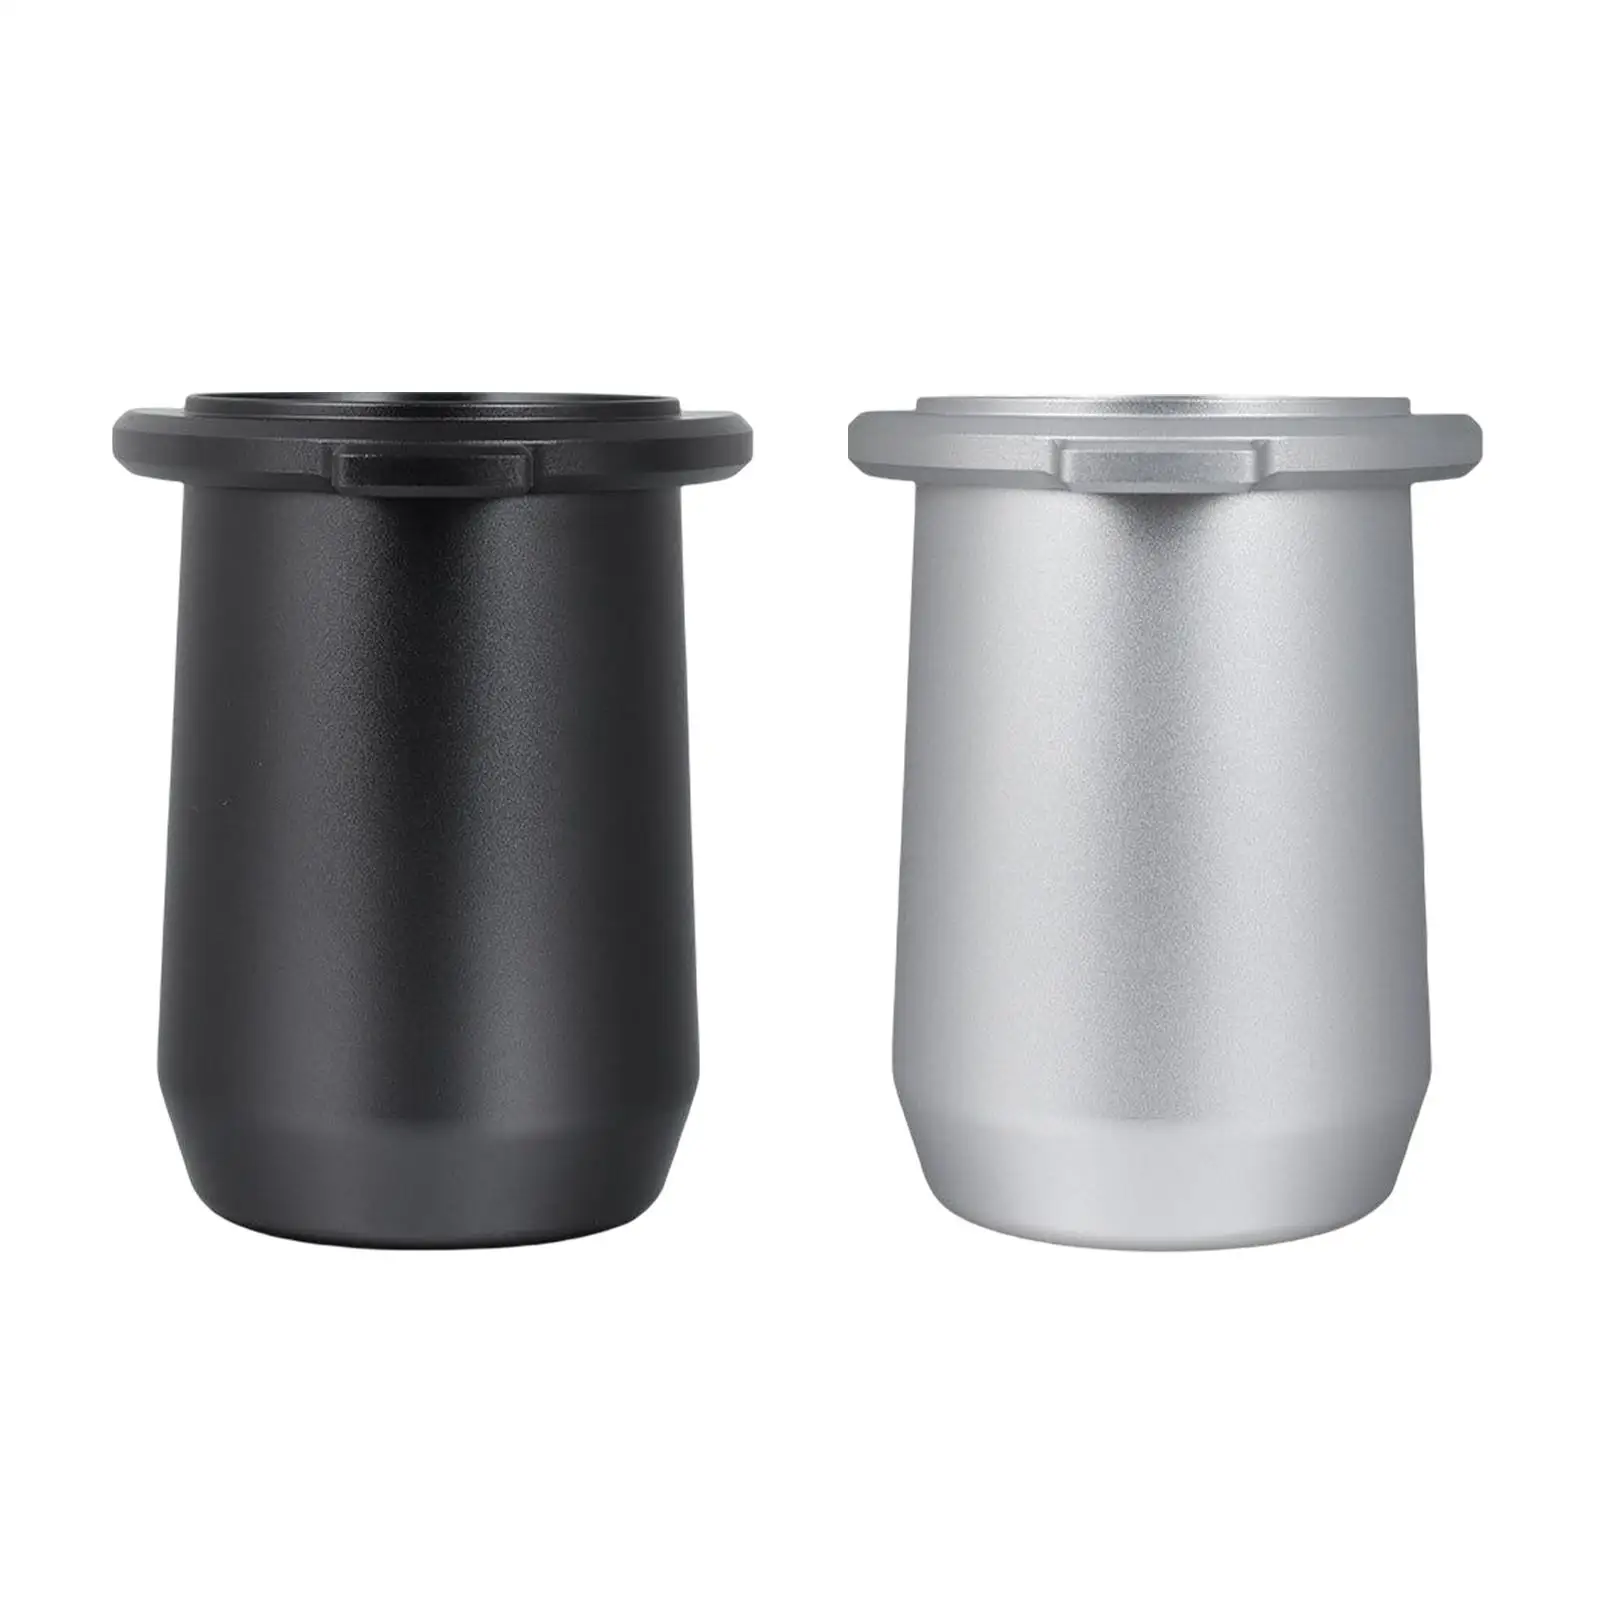 Aluminum Alloy Coffee Dosing Cup Sniffing Mug Durable Coffee Dosing Cup for 54mm Coffee Tamper Espresso Machine Kitchen Tools